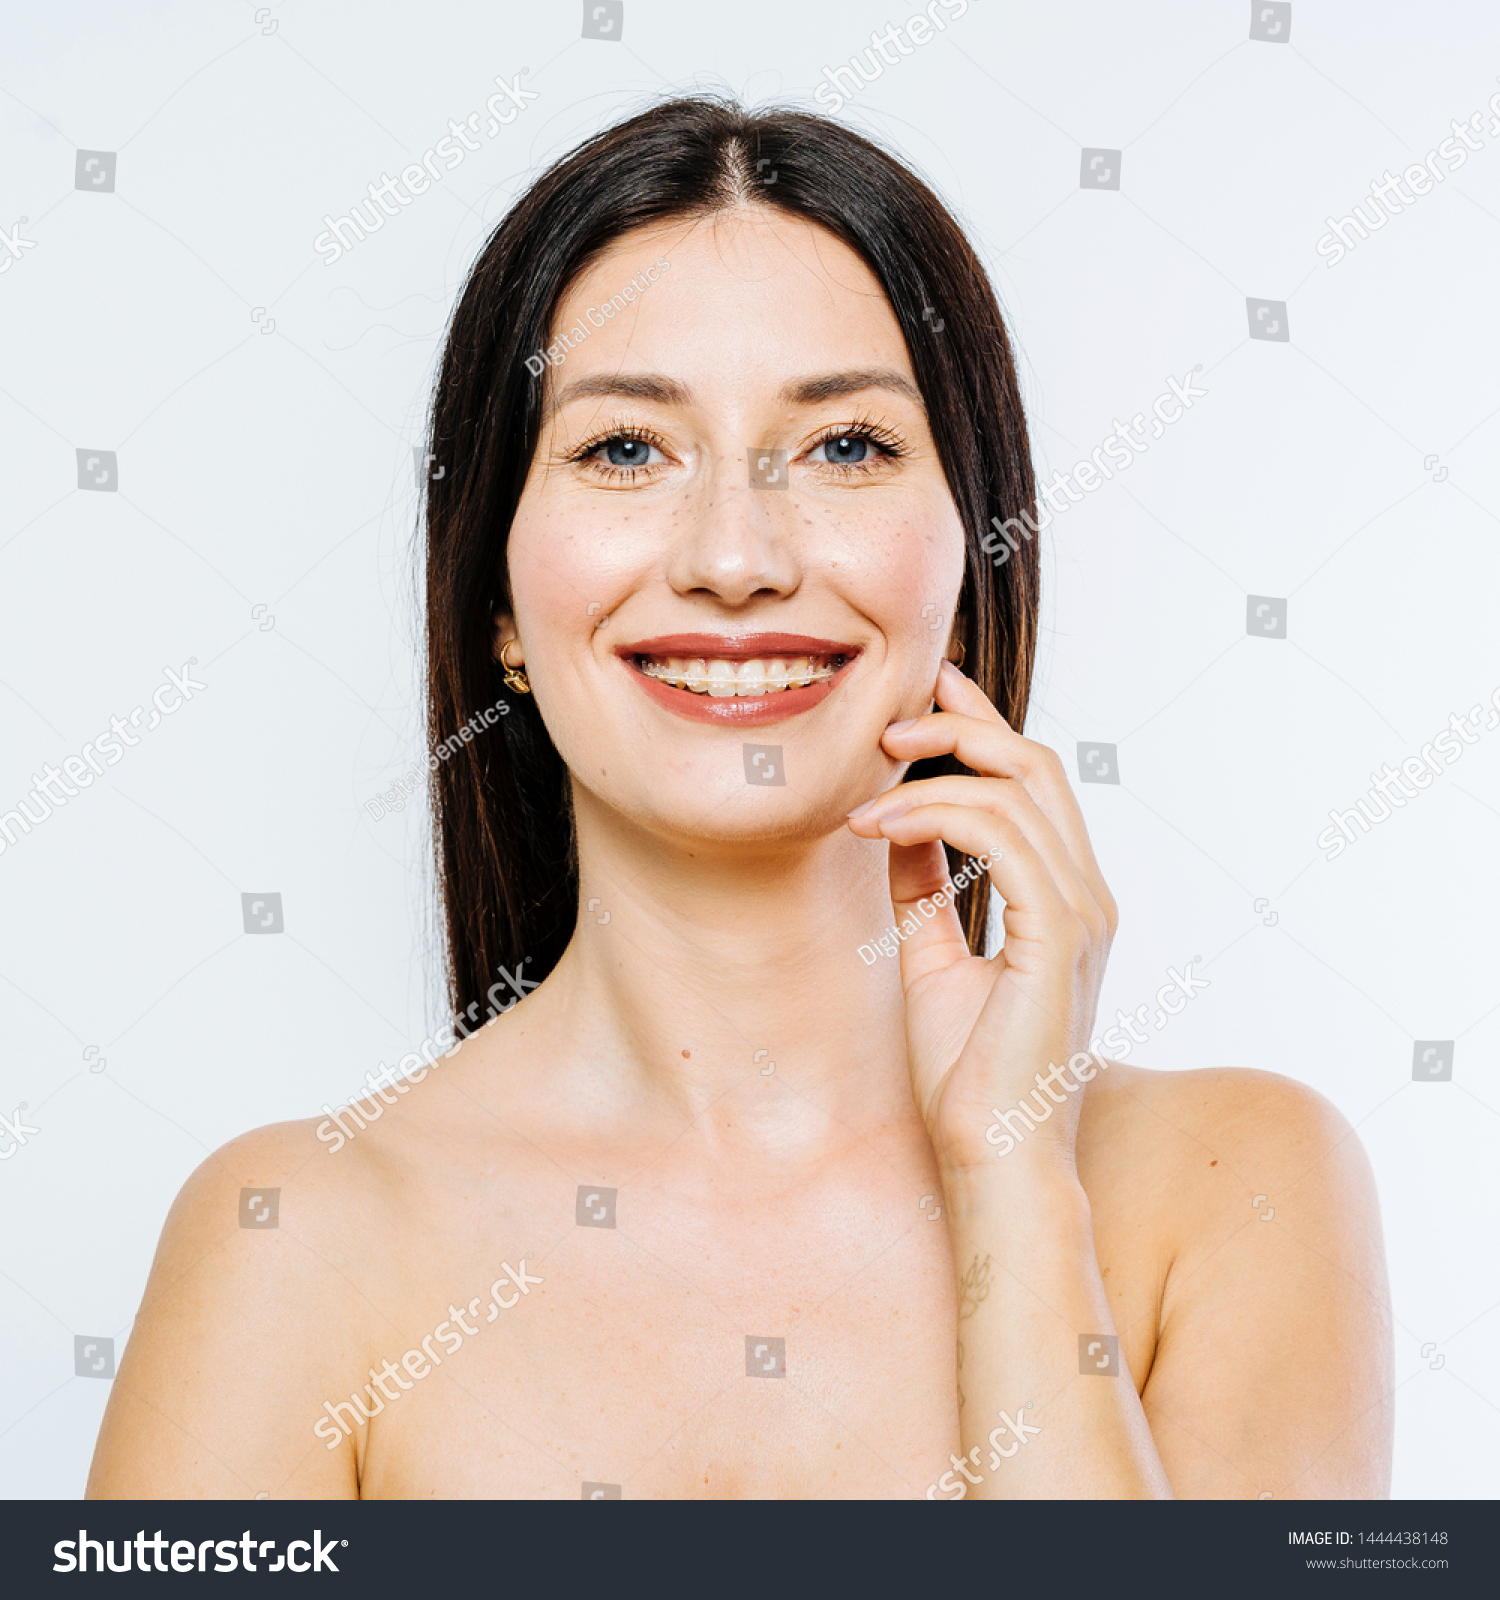 Portrait of beautiful brunette model with braces on white background #1444438148